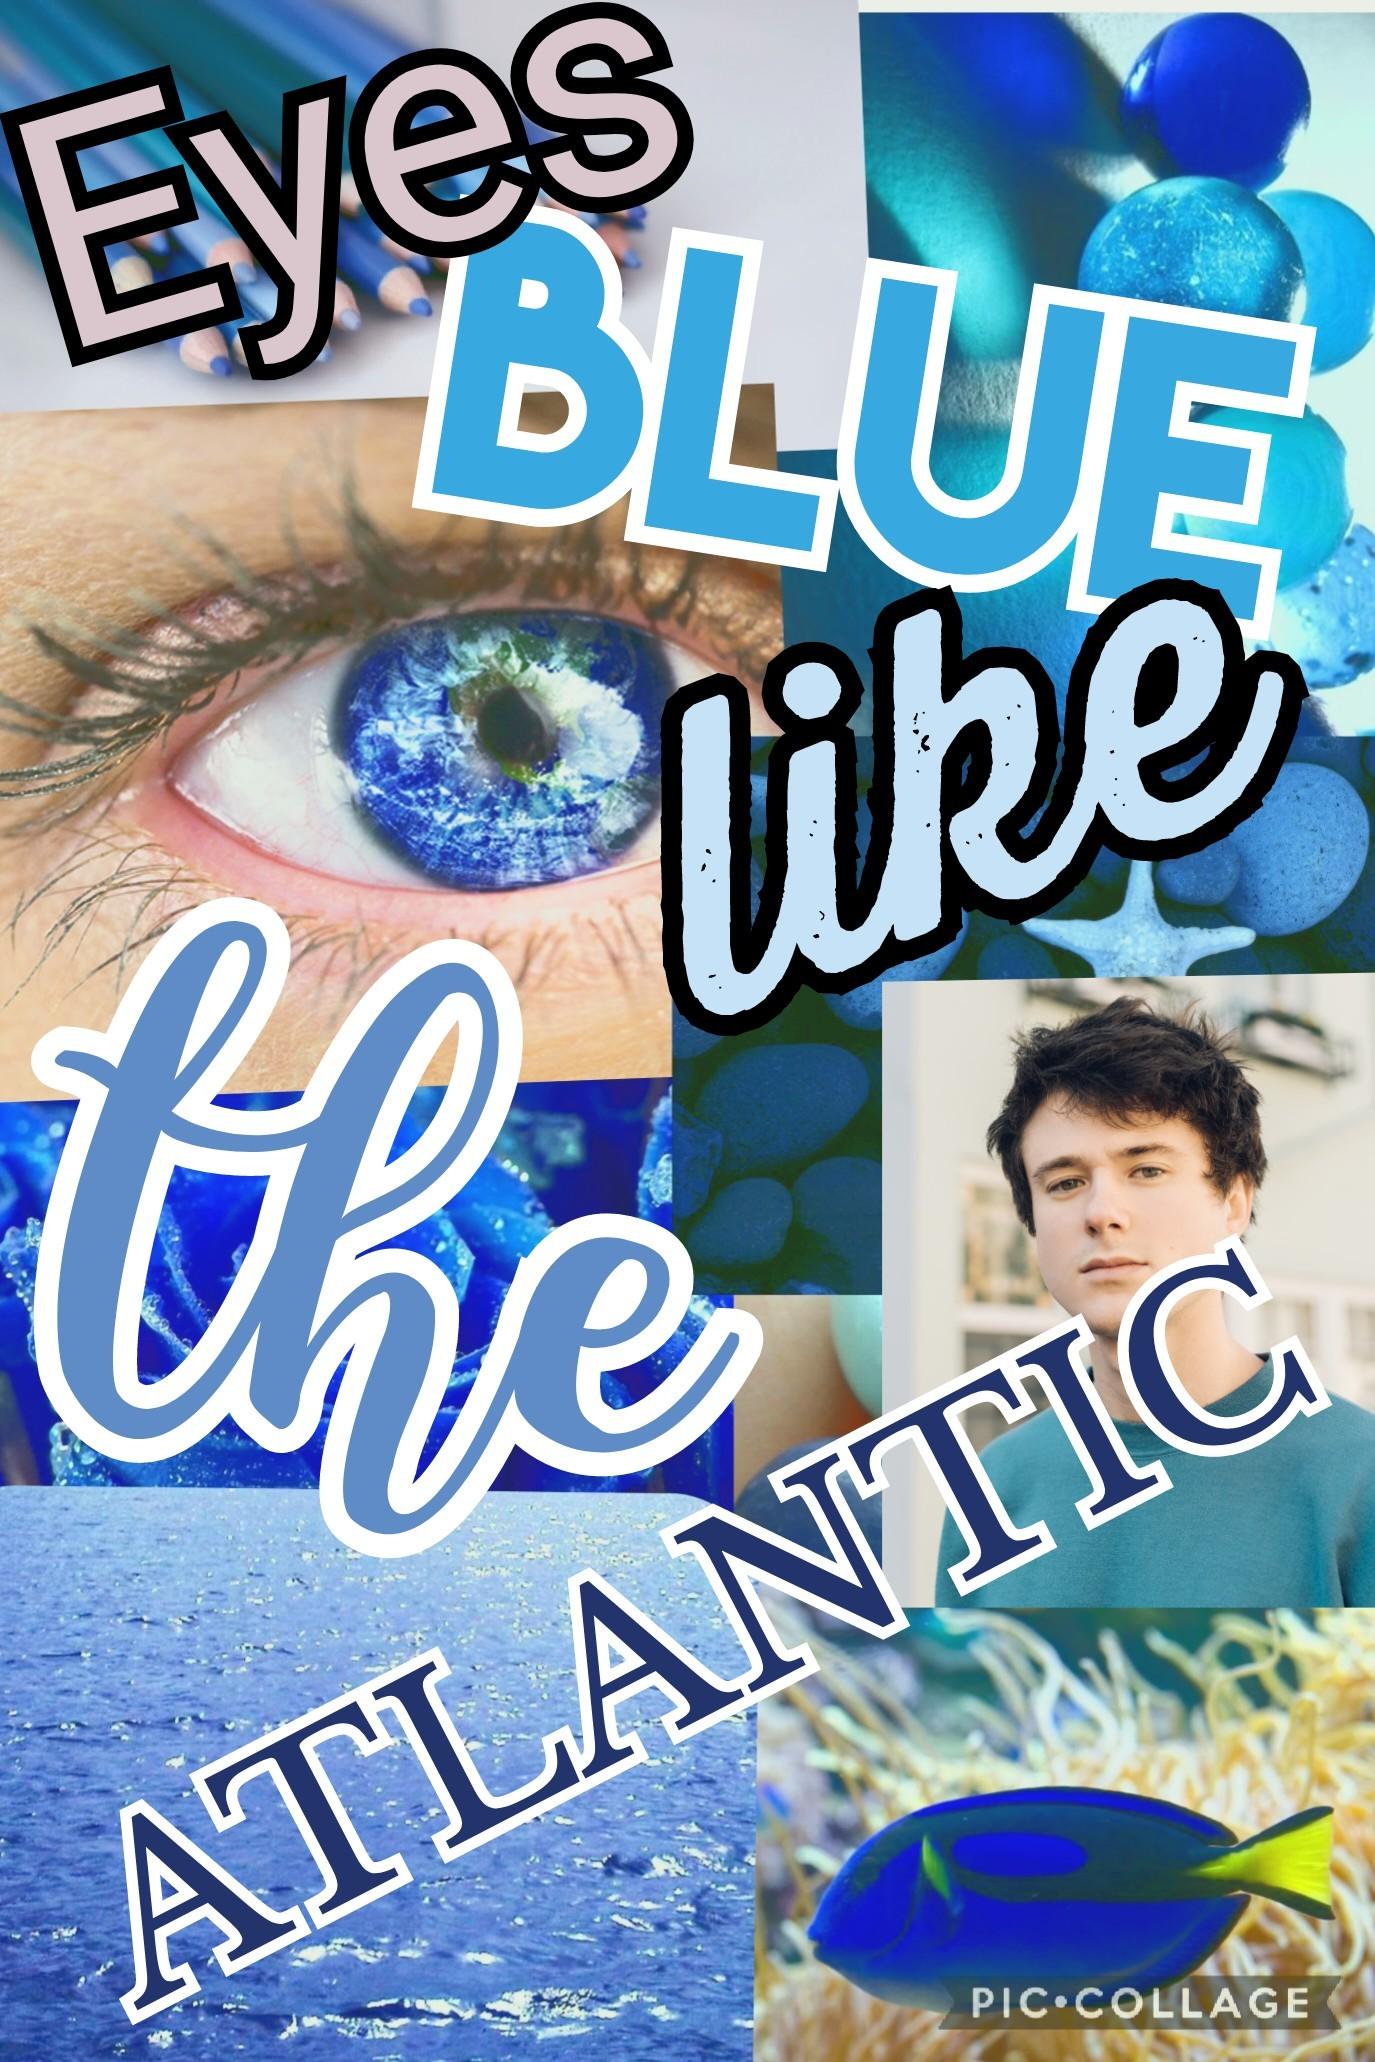 Eyes blue the Atlantic by Alec Benjamen!!!! What's your fav Alec Benjamen song? Some of these are rly popular: The Way you Felt, Devil Dosen't Bargin, I Sent my Therapist to Therapy, Oh My God, and just through this new one out there Pick Me